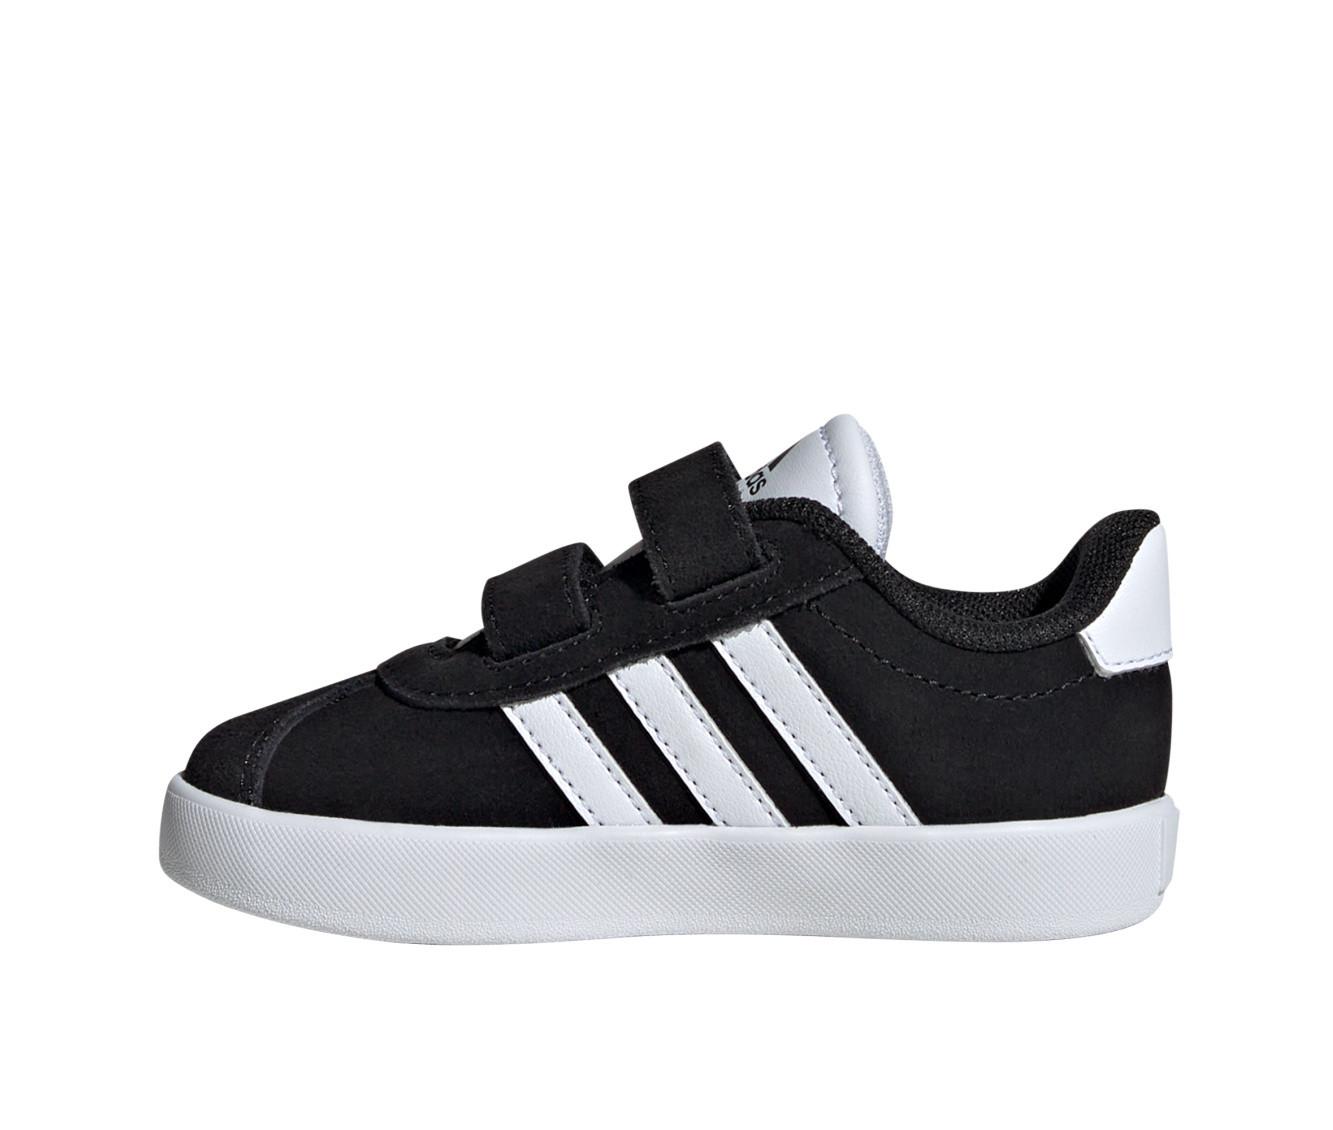 Boys' Adidas Infant & Toddler VL Court 3.0 Sneakers